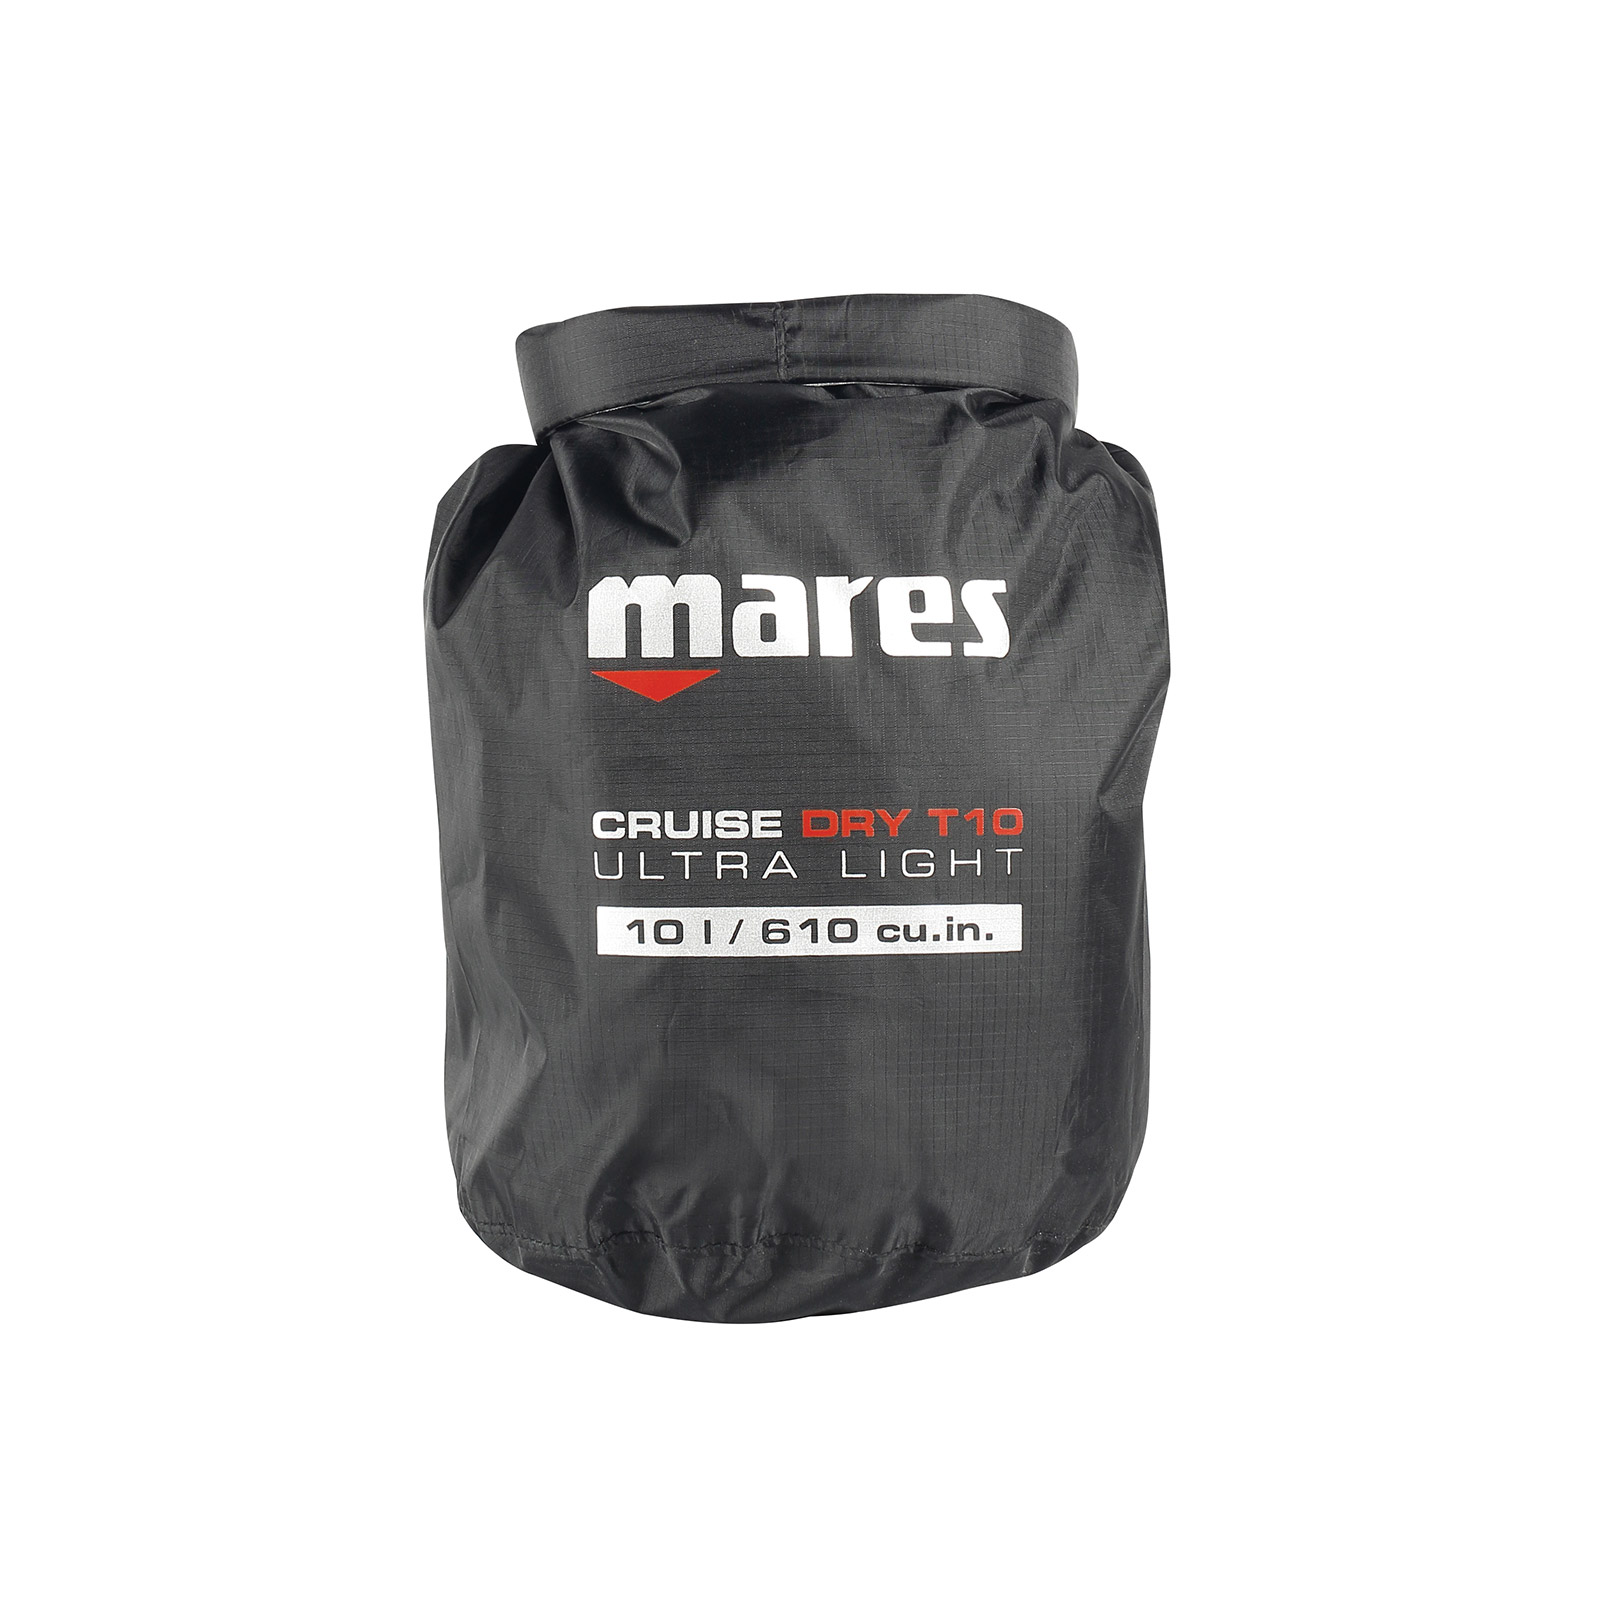 Mares Cruise Dry Ultra Light Bag - 10L